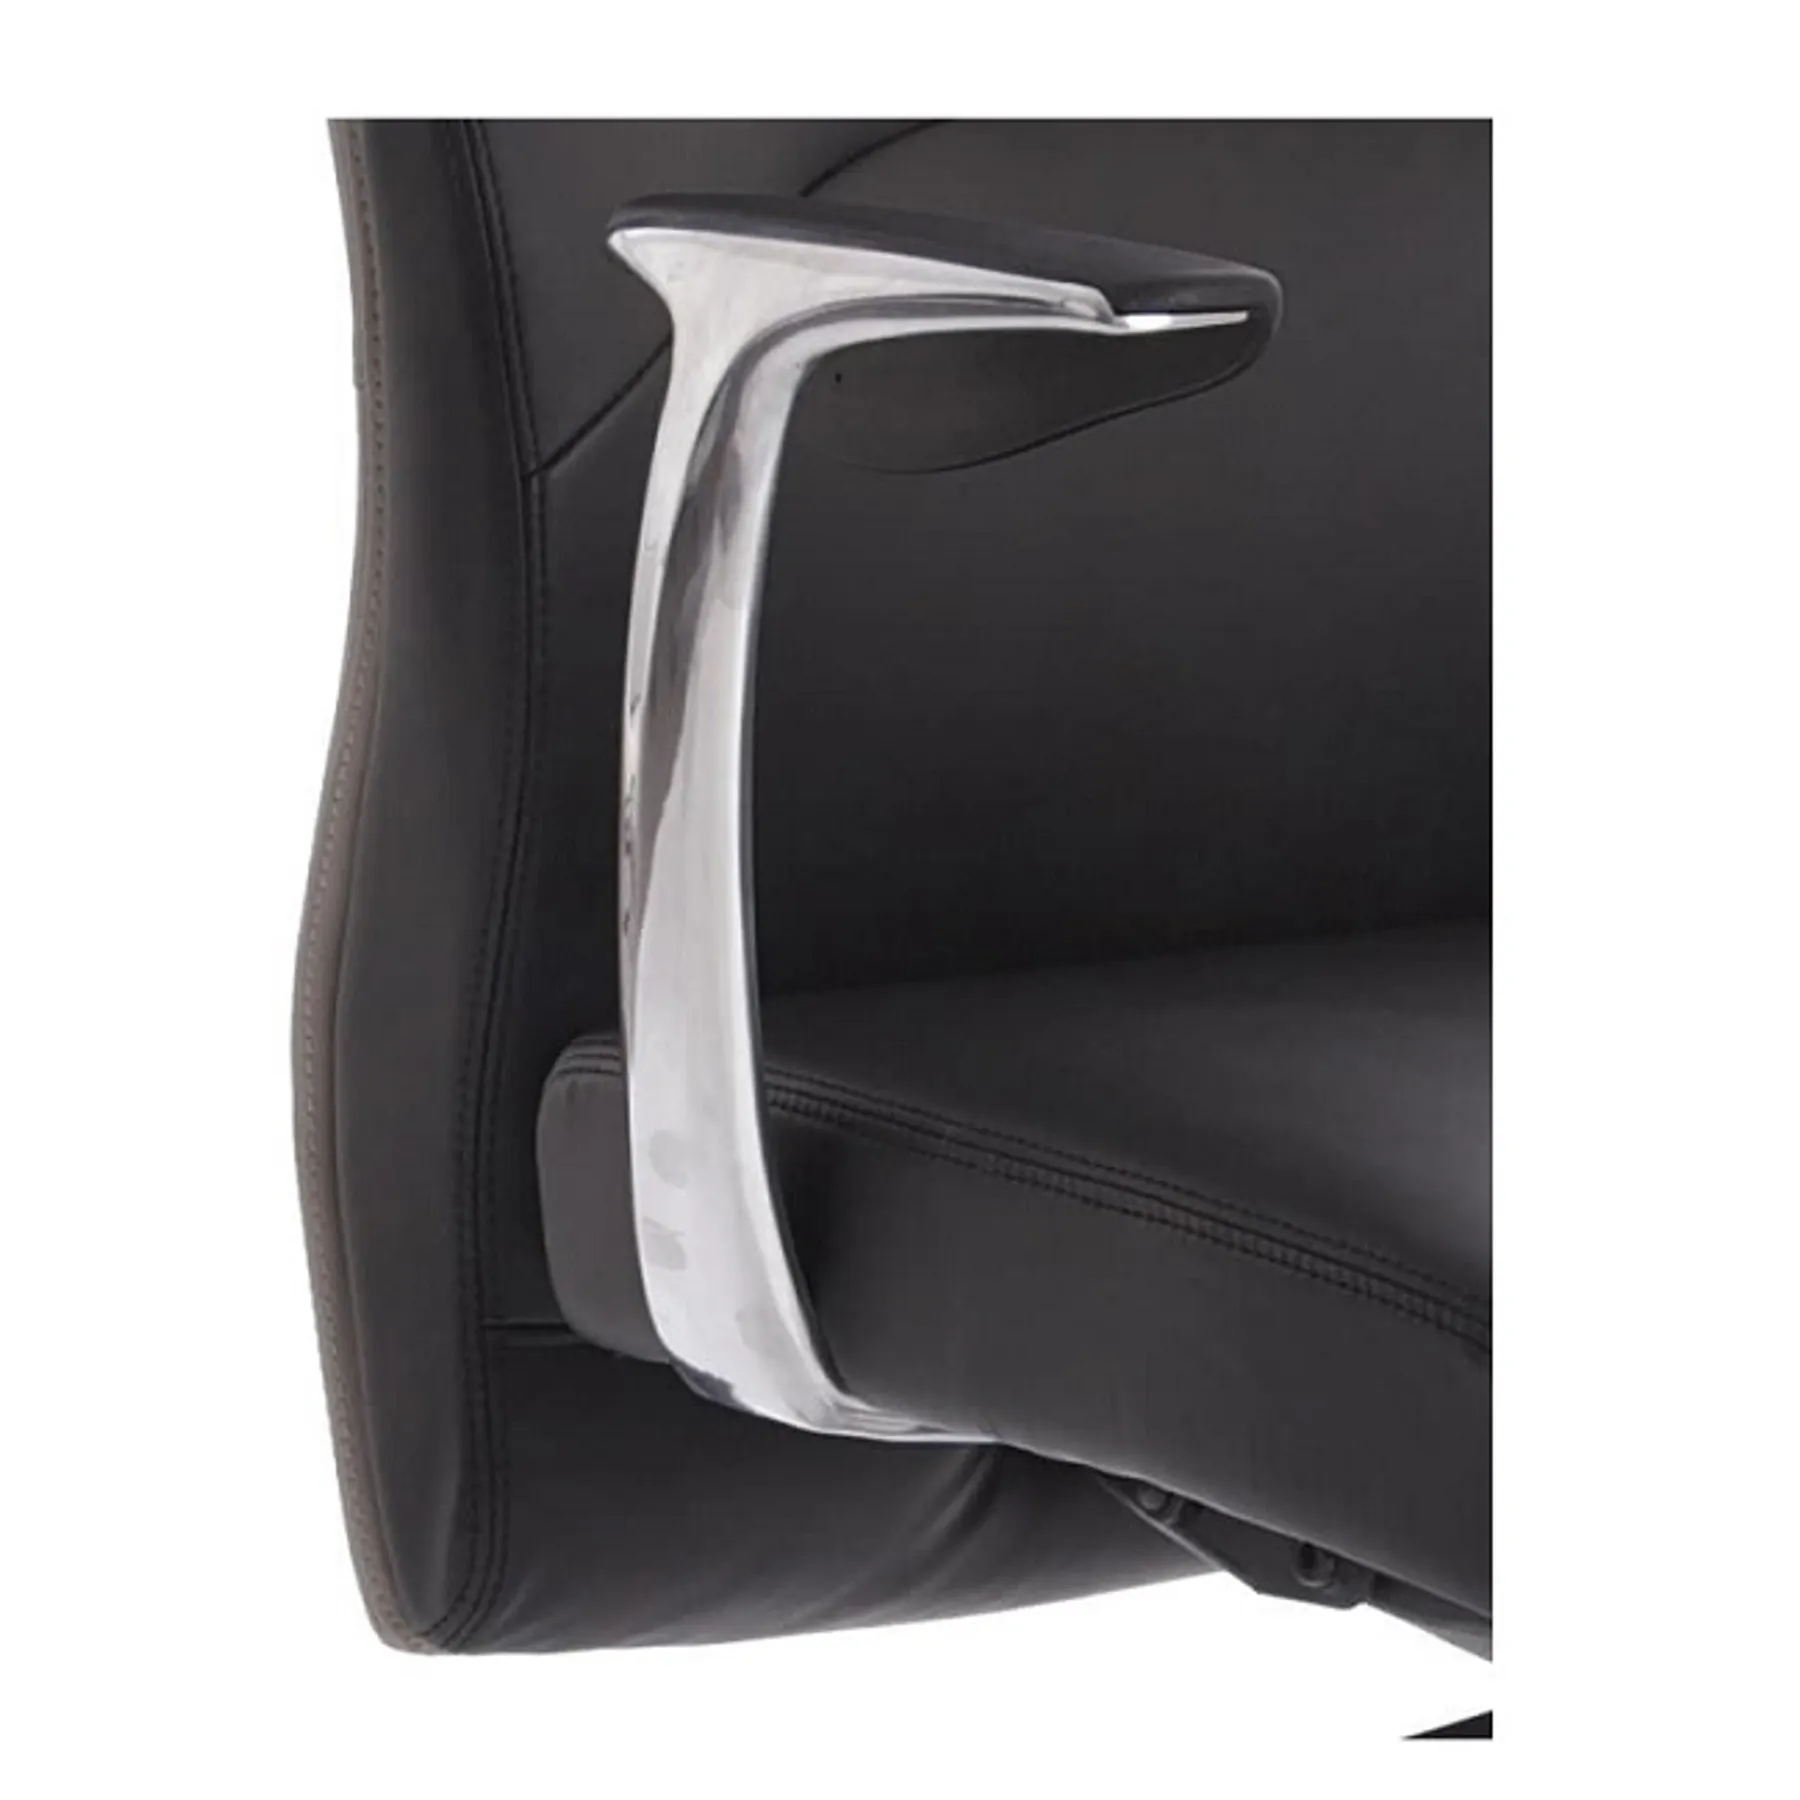 Lof Direct Dynamic mien black leather visitors chair arm detail